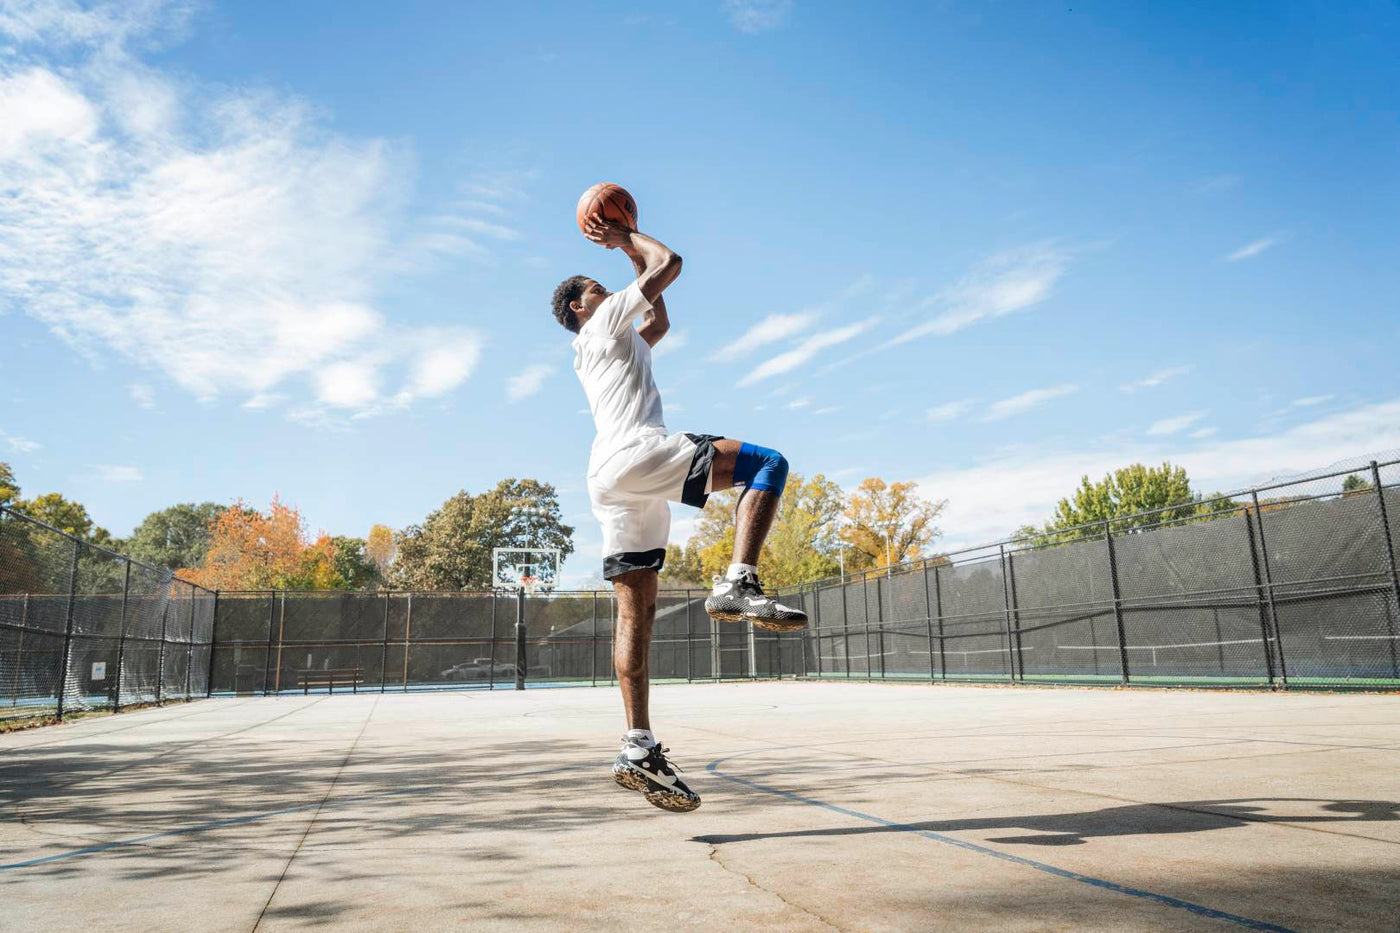 Man in the middle of making a shot on an outdoor basketball court. He is wearing Bauerfeind's NBA Compression Knee Support and basketball shoes, essential basketball training gear